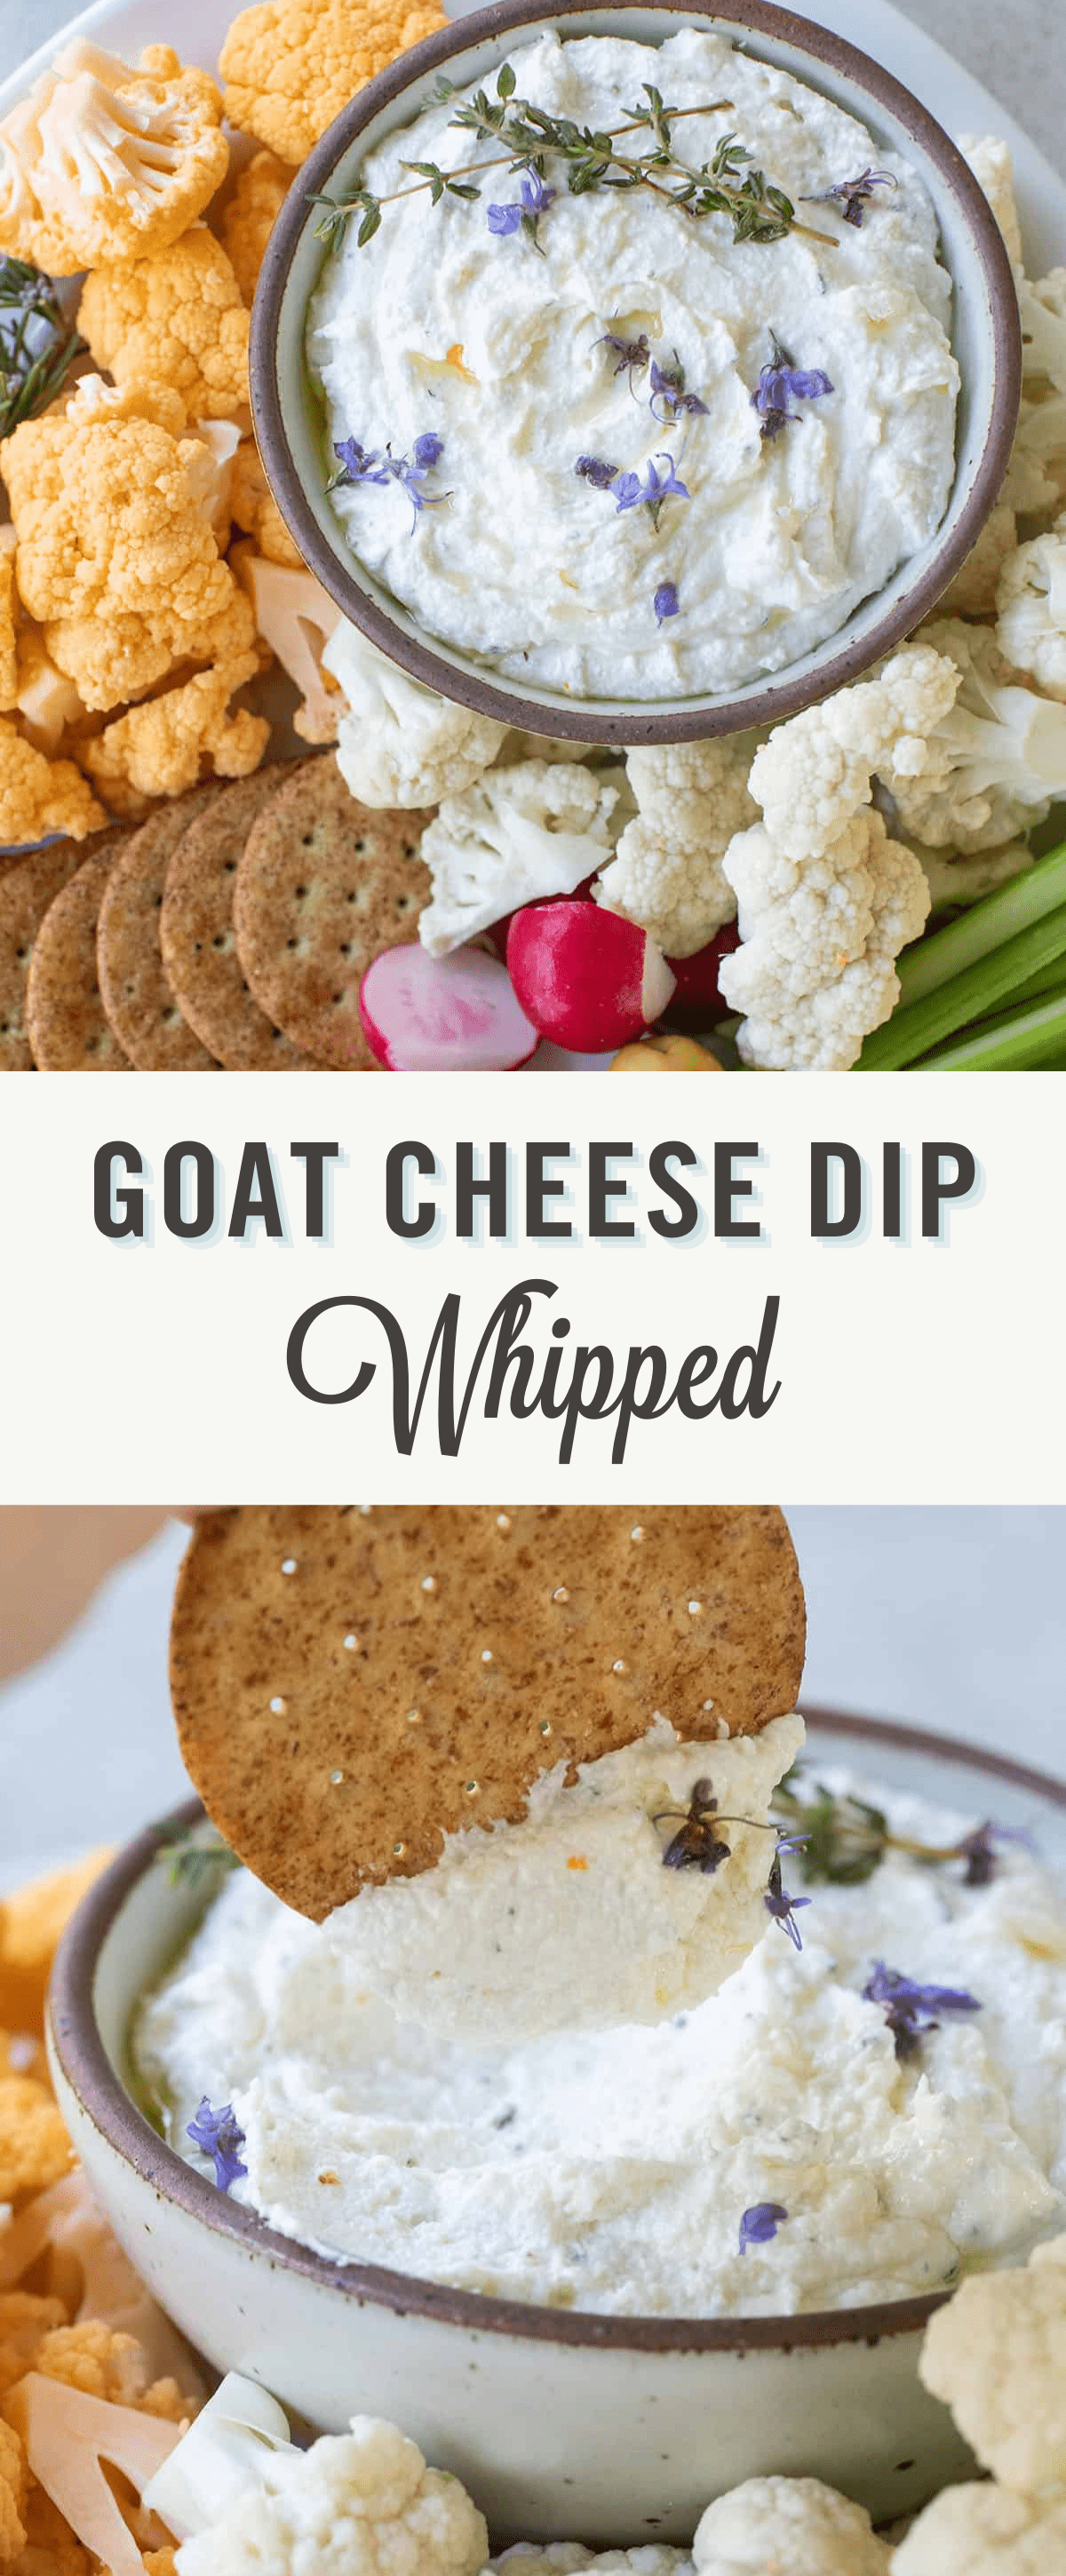 whipped goat cheese dip.